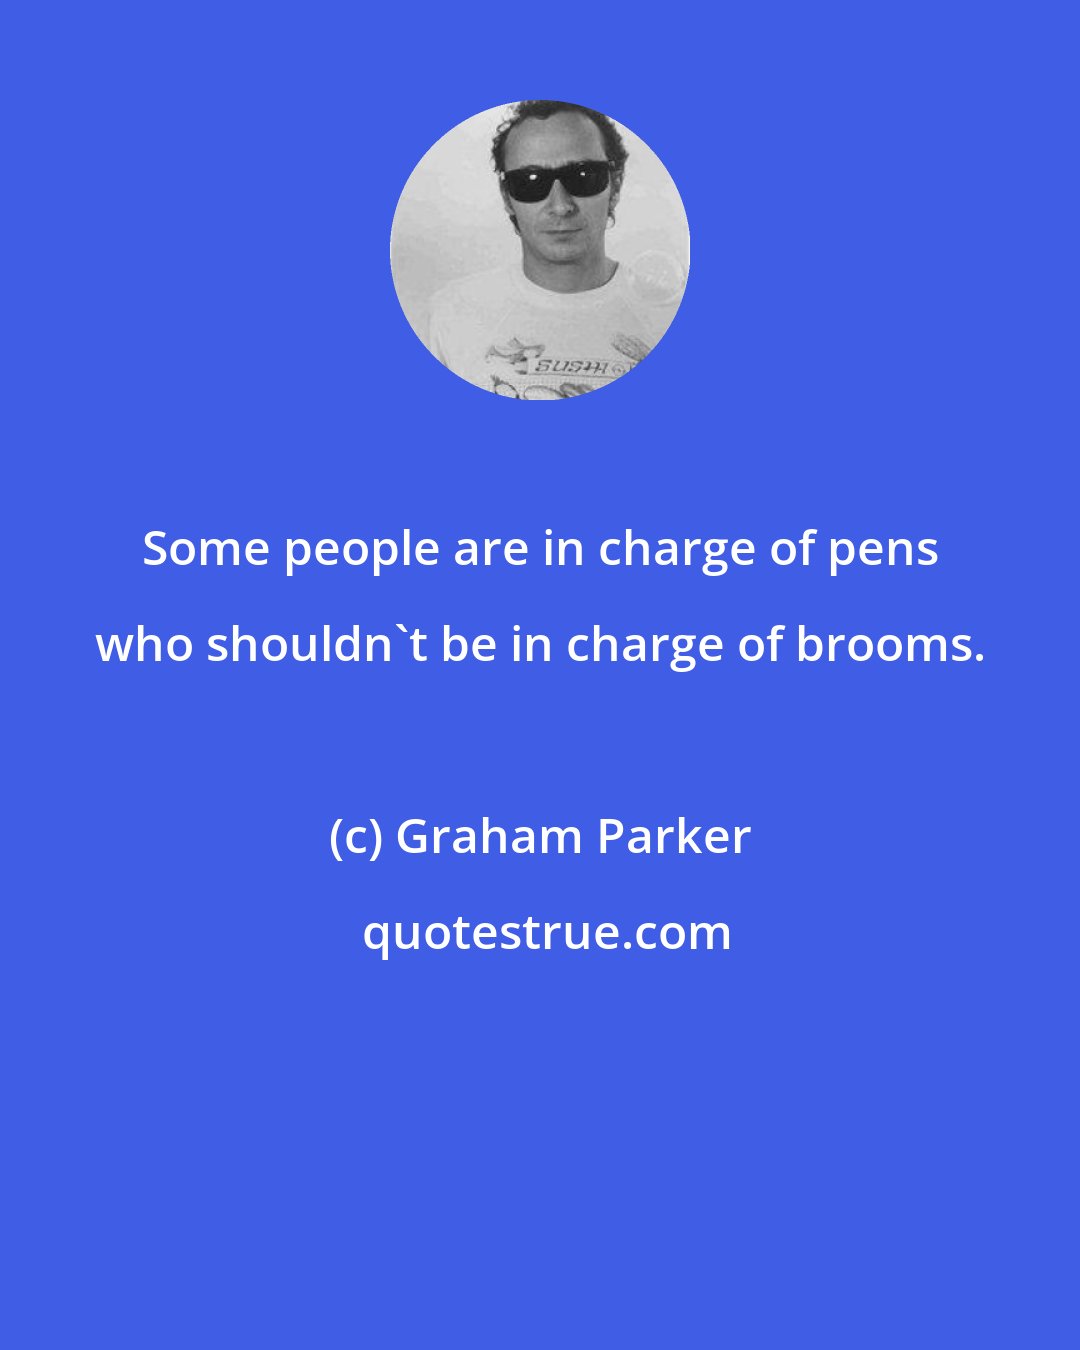 Graham Parker: Some people are in charge of pens who shouldn't be in charge of brooms.